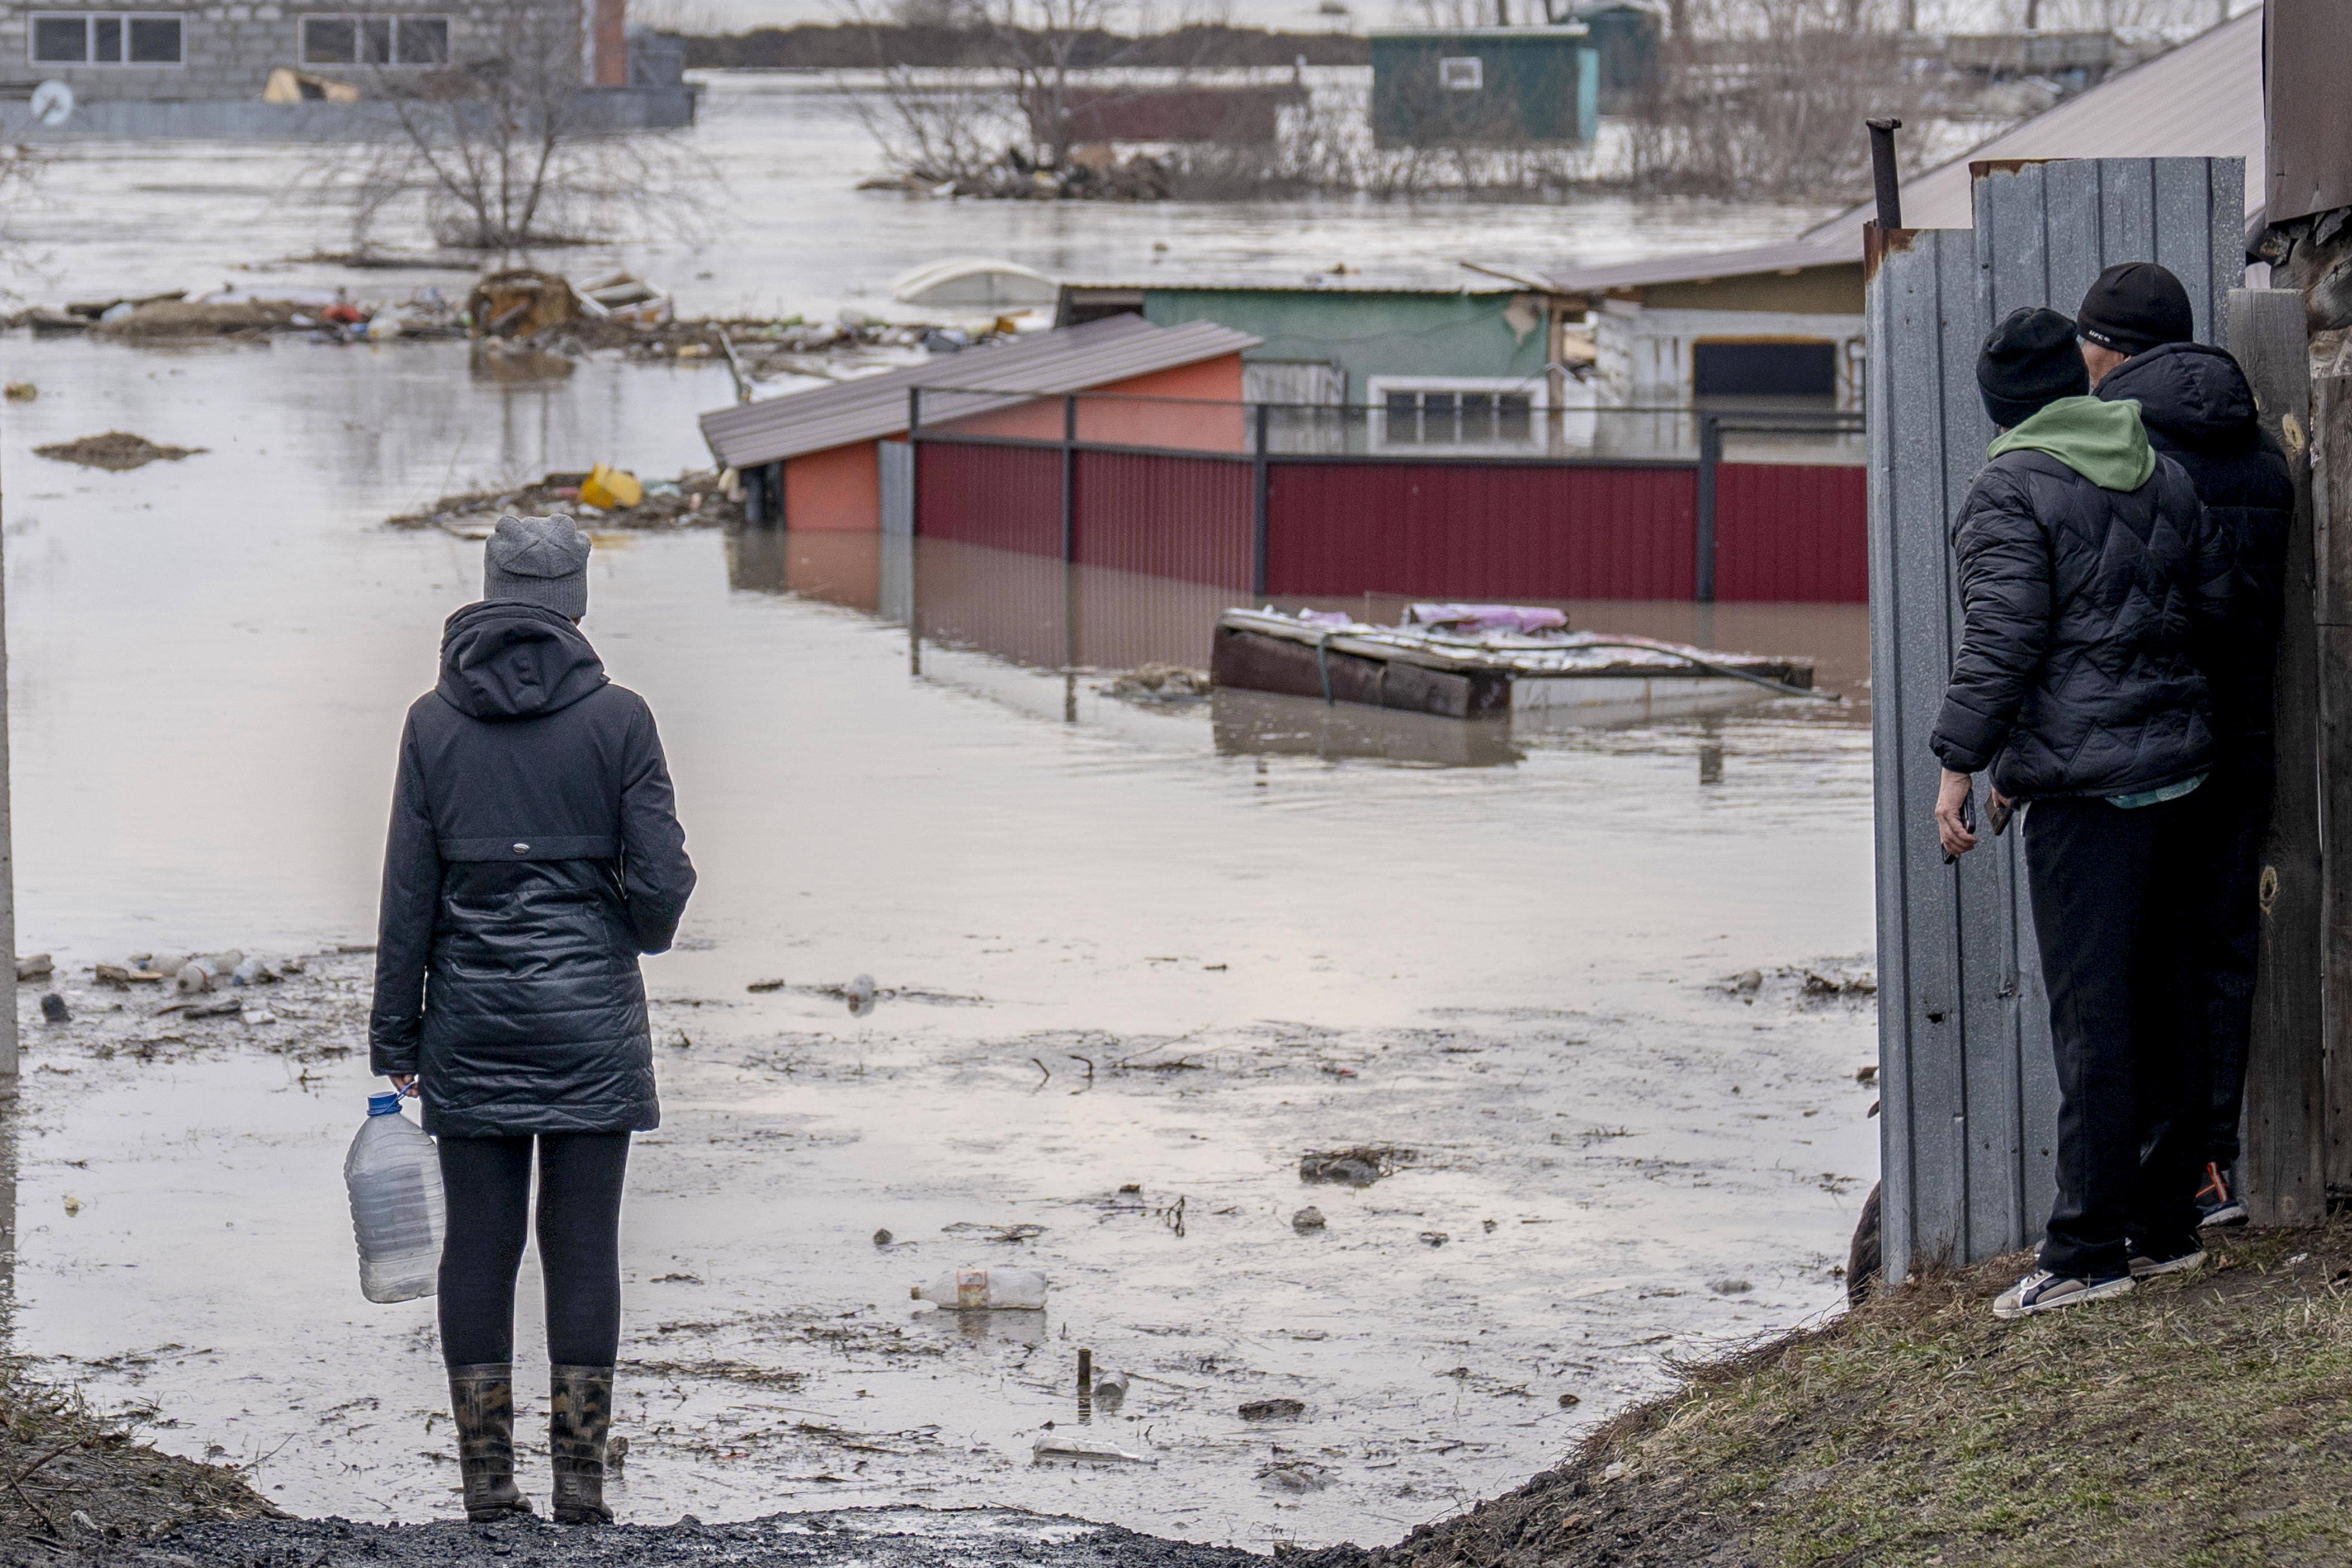 floods kill dozens, force thousands to flee in russia and central asia